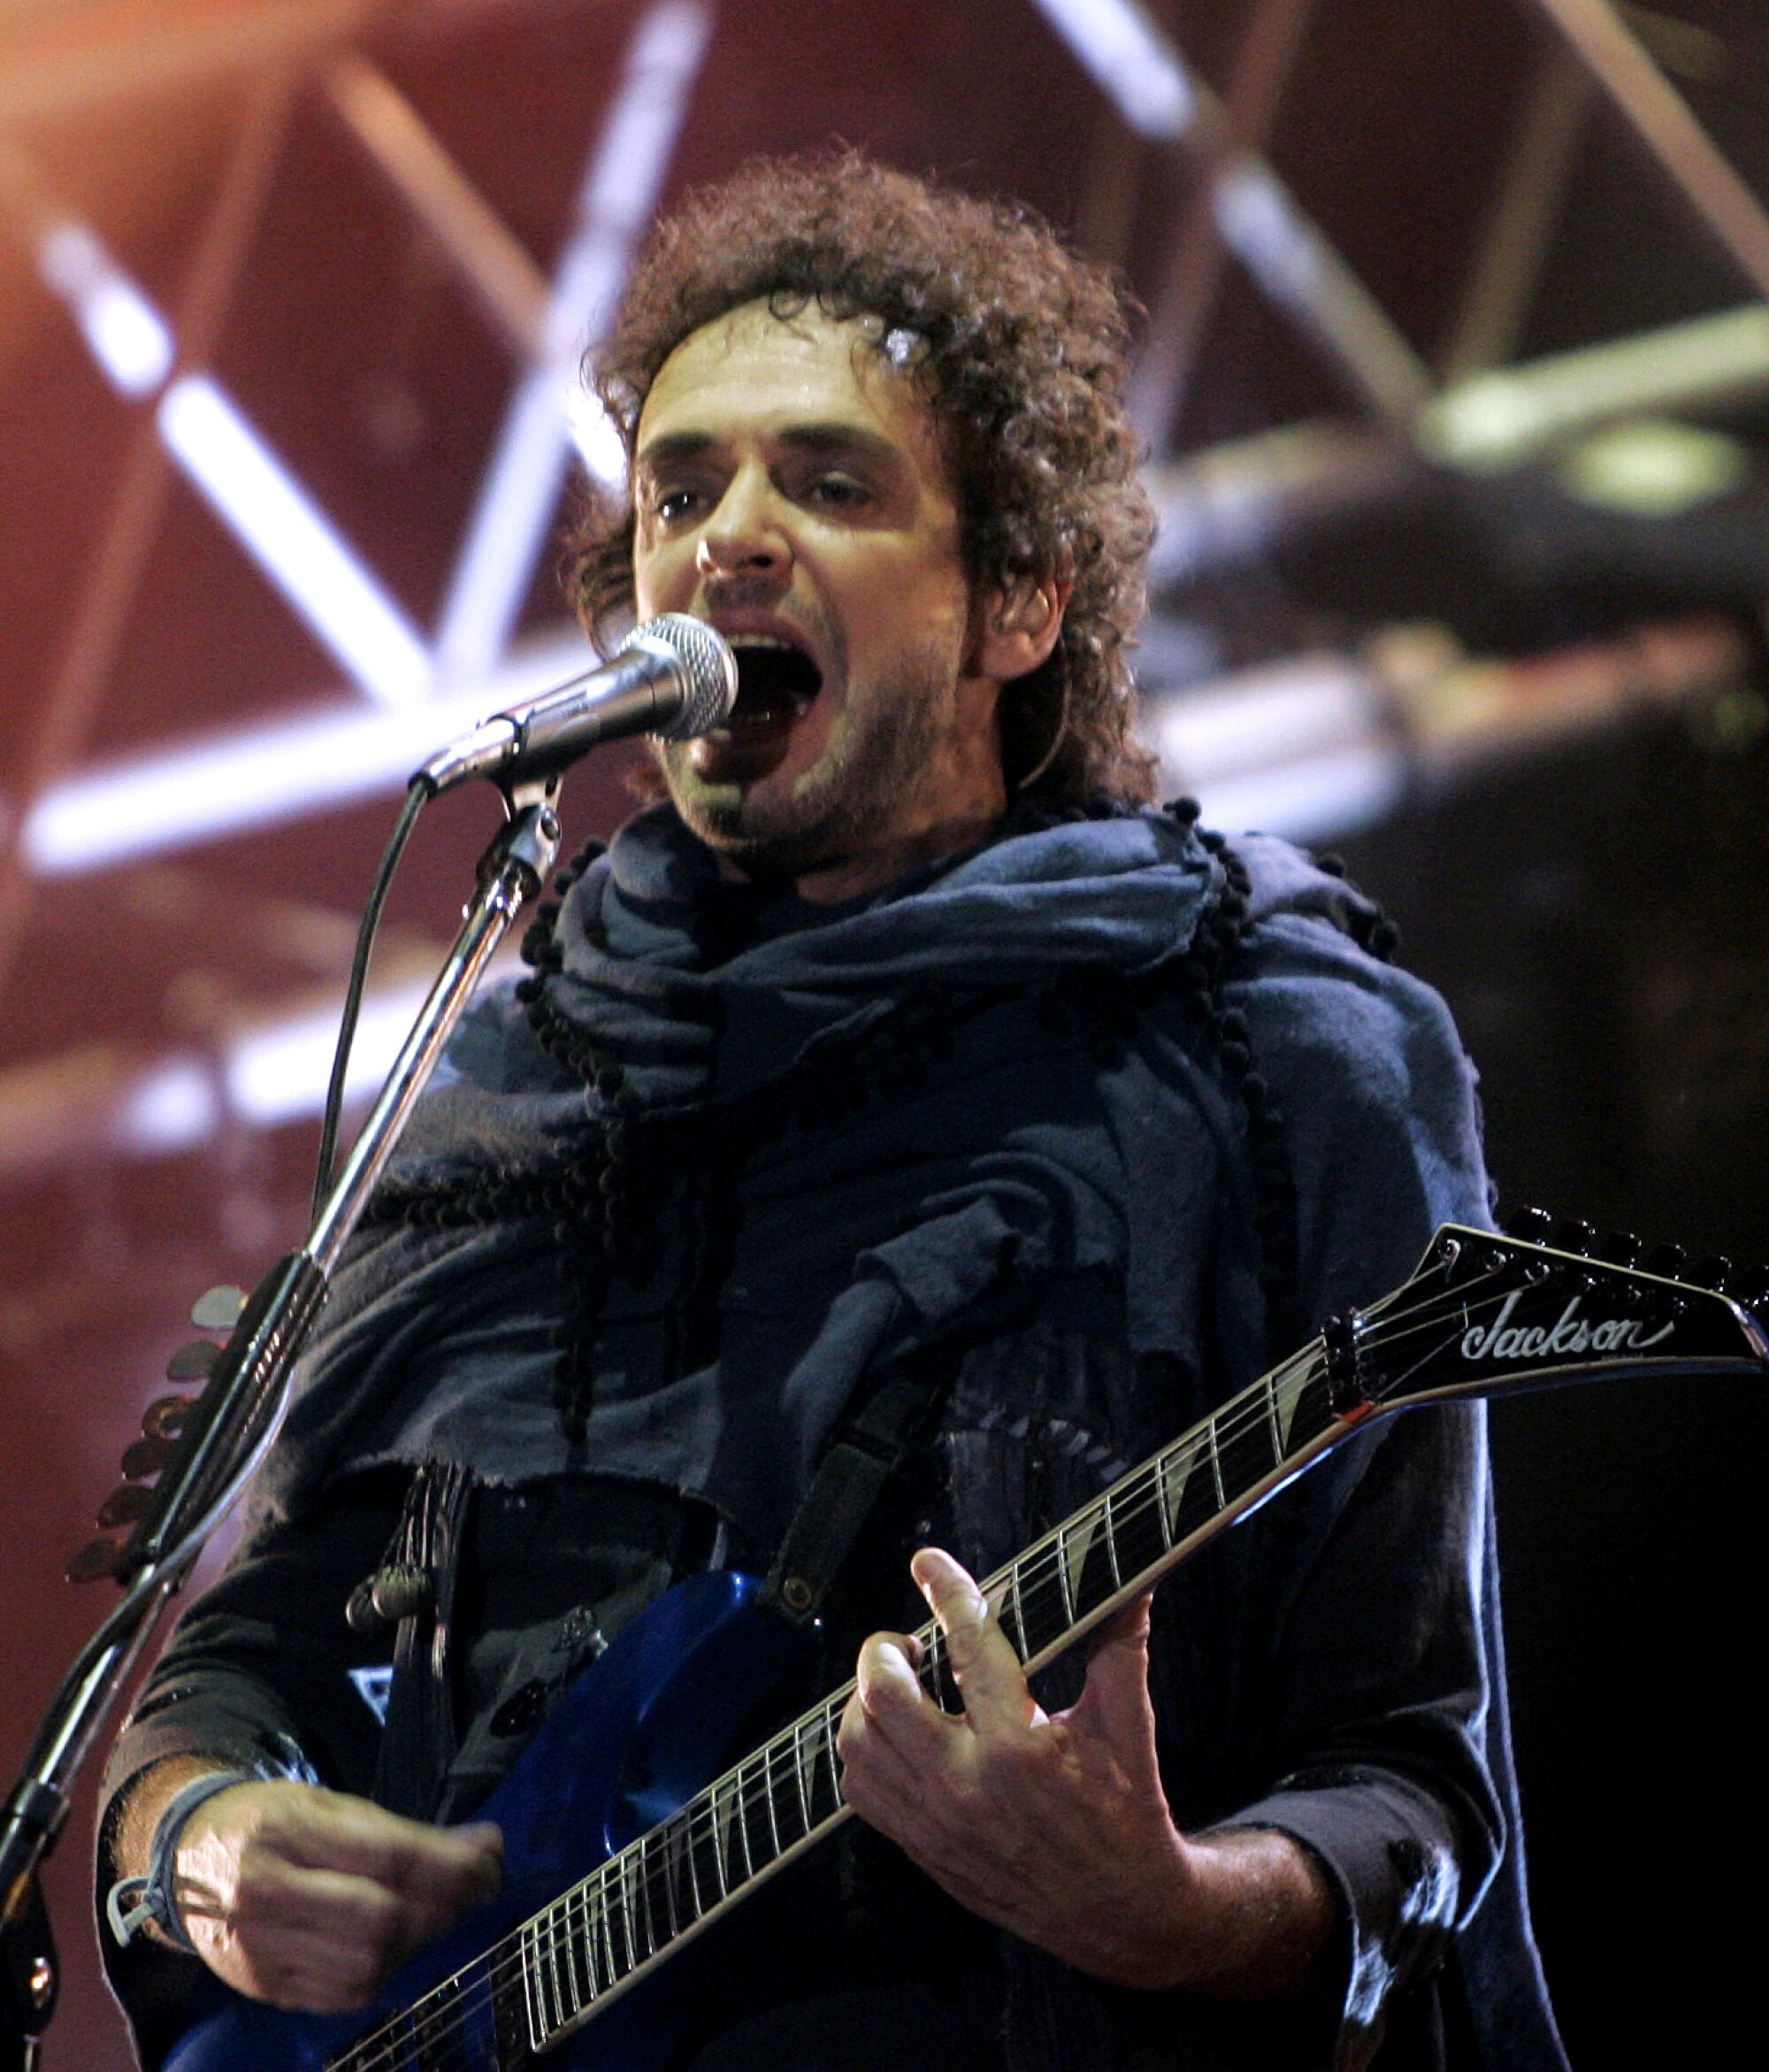 A man with dark curly hair plays guitar and sings into a microphone onstage